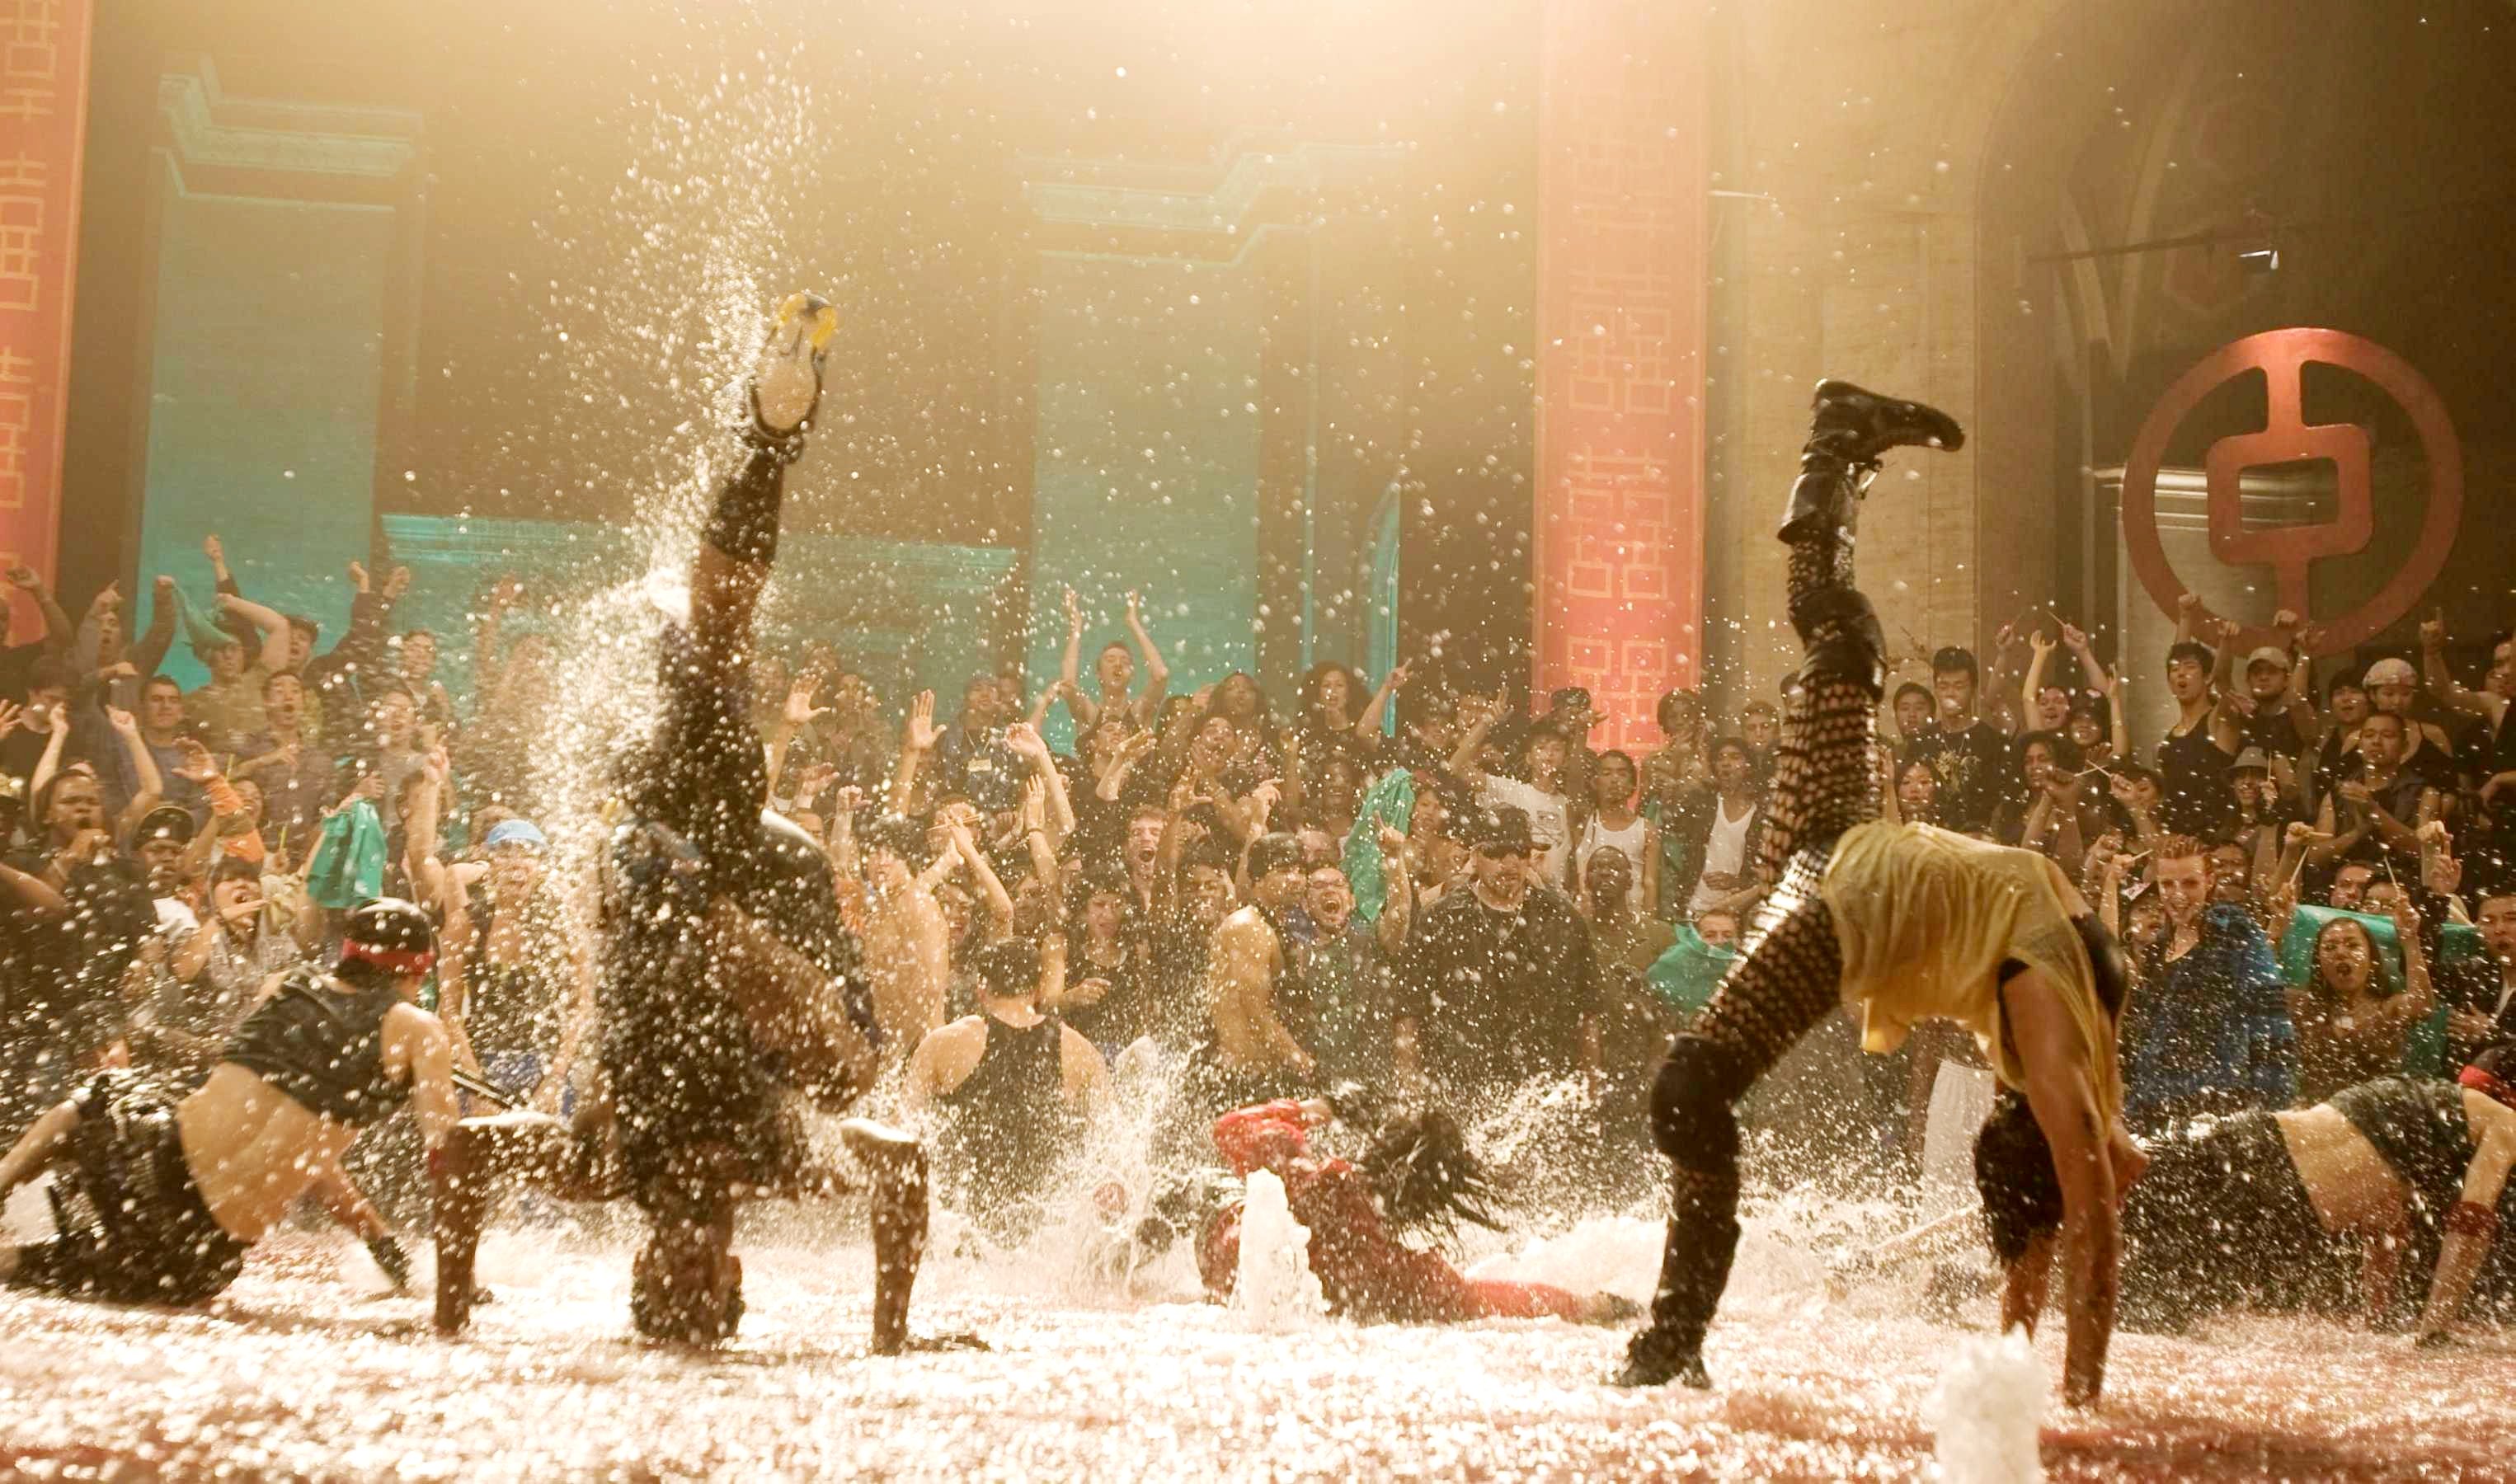 A scene from Touchstone Pictures' Step Up 3-D (2010)